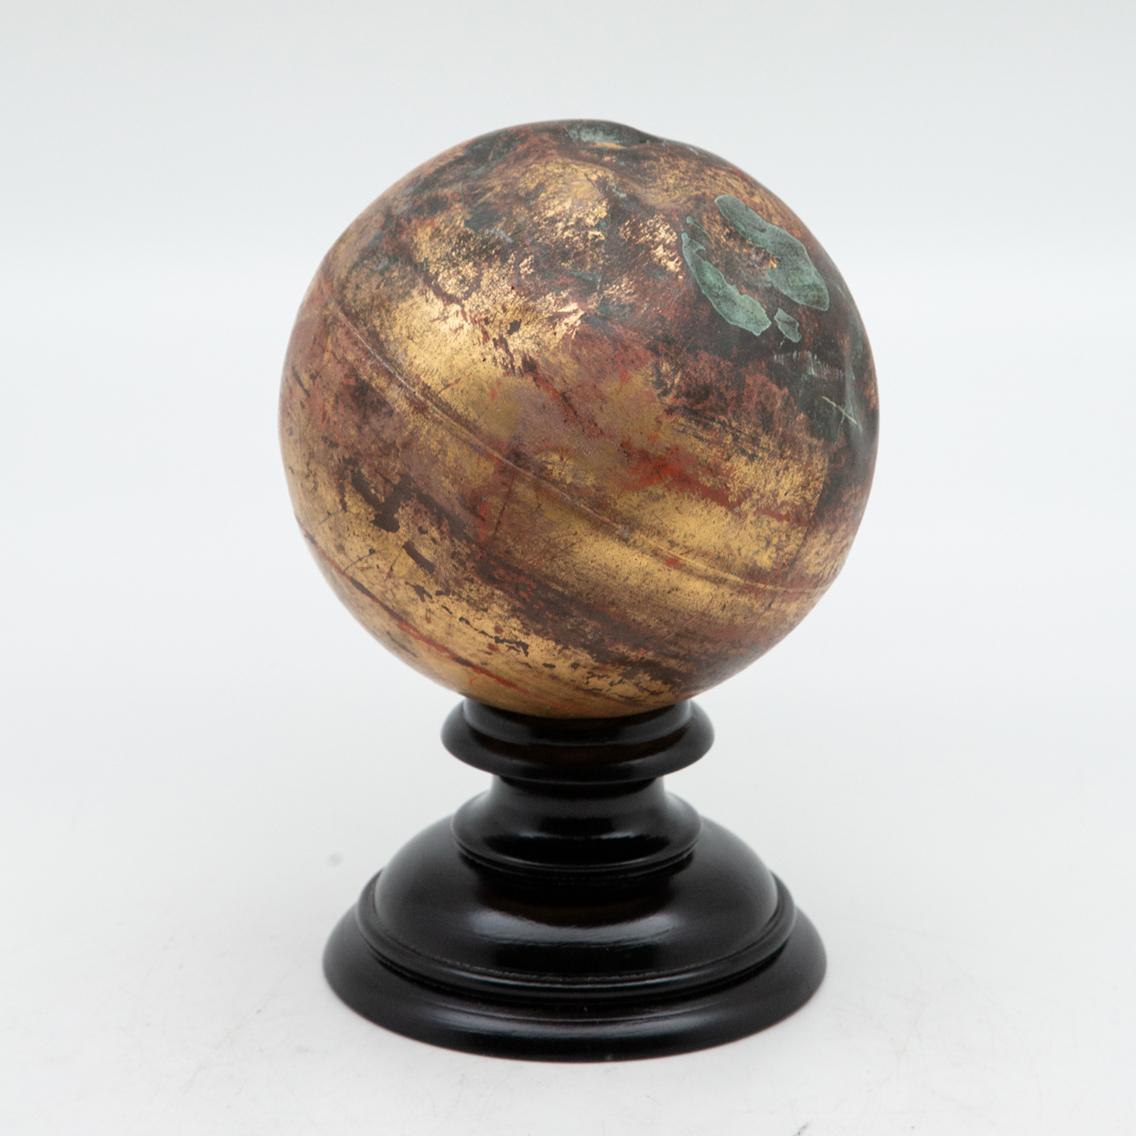 Mounted planet. Gilded copper sphere finial mounted on turned-wood ebony base. Measure: 9.5